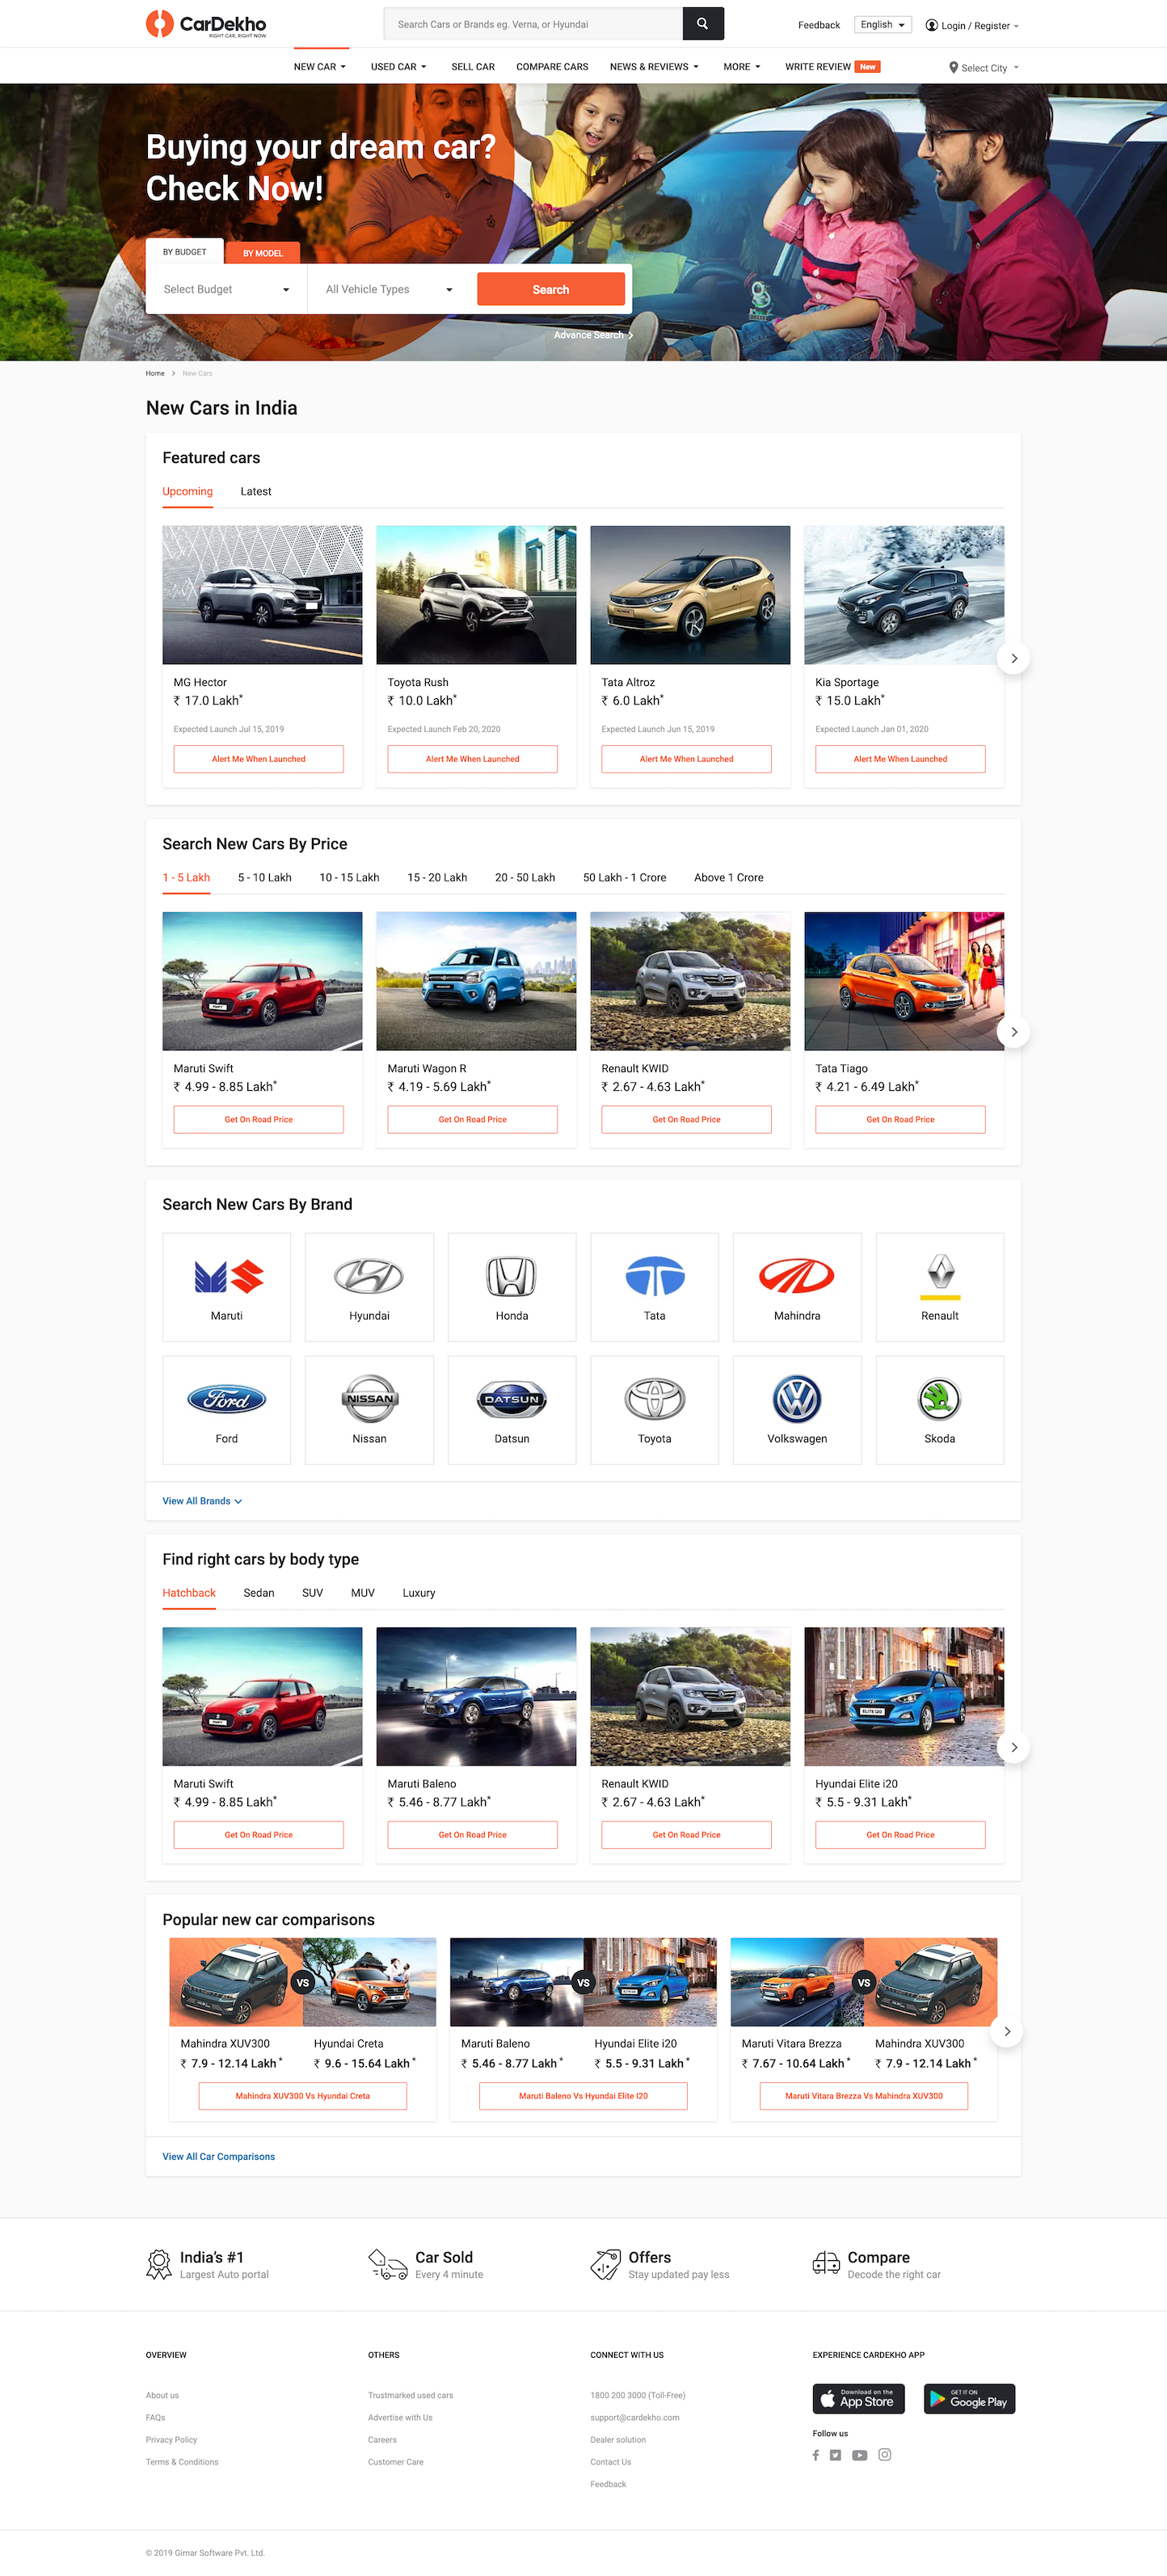 Screenshot of the New Cars page from the Cardekho website.